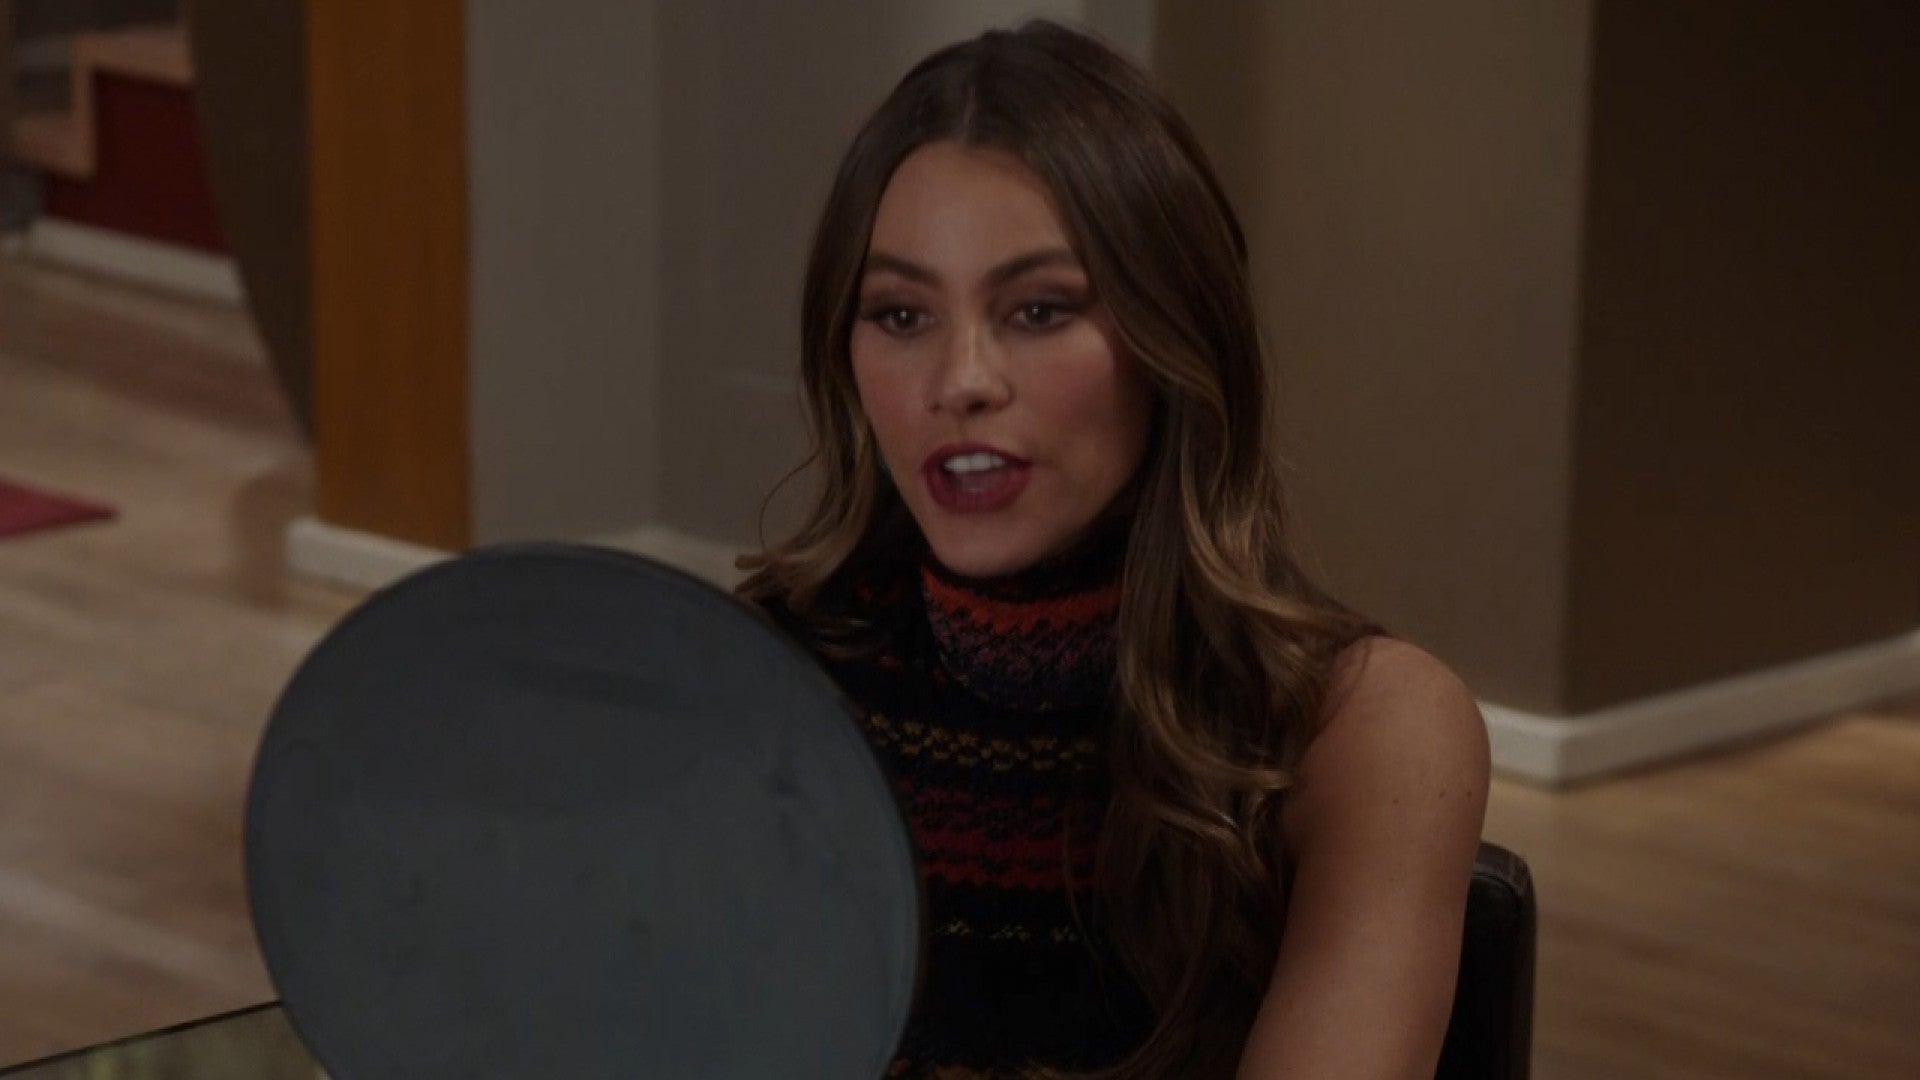 EXCLUSIVE: Watch Sofia Vergara Hilariously Try to Change Her Iconic Accent  in This 'Modern Family' Sneak Peek! | Entertainment Tonight